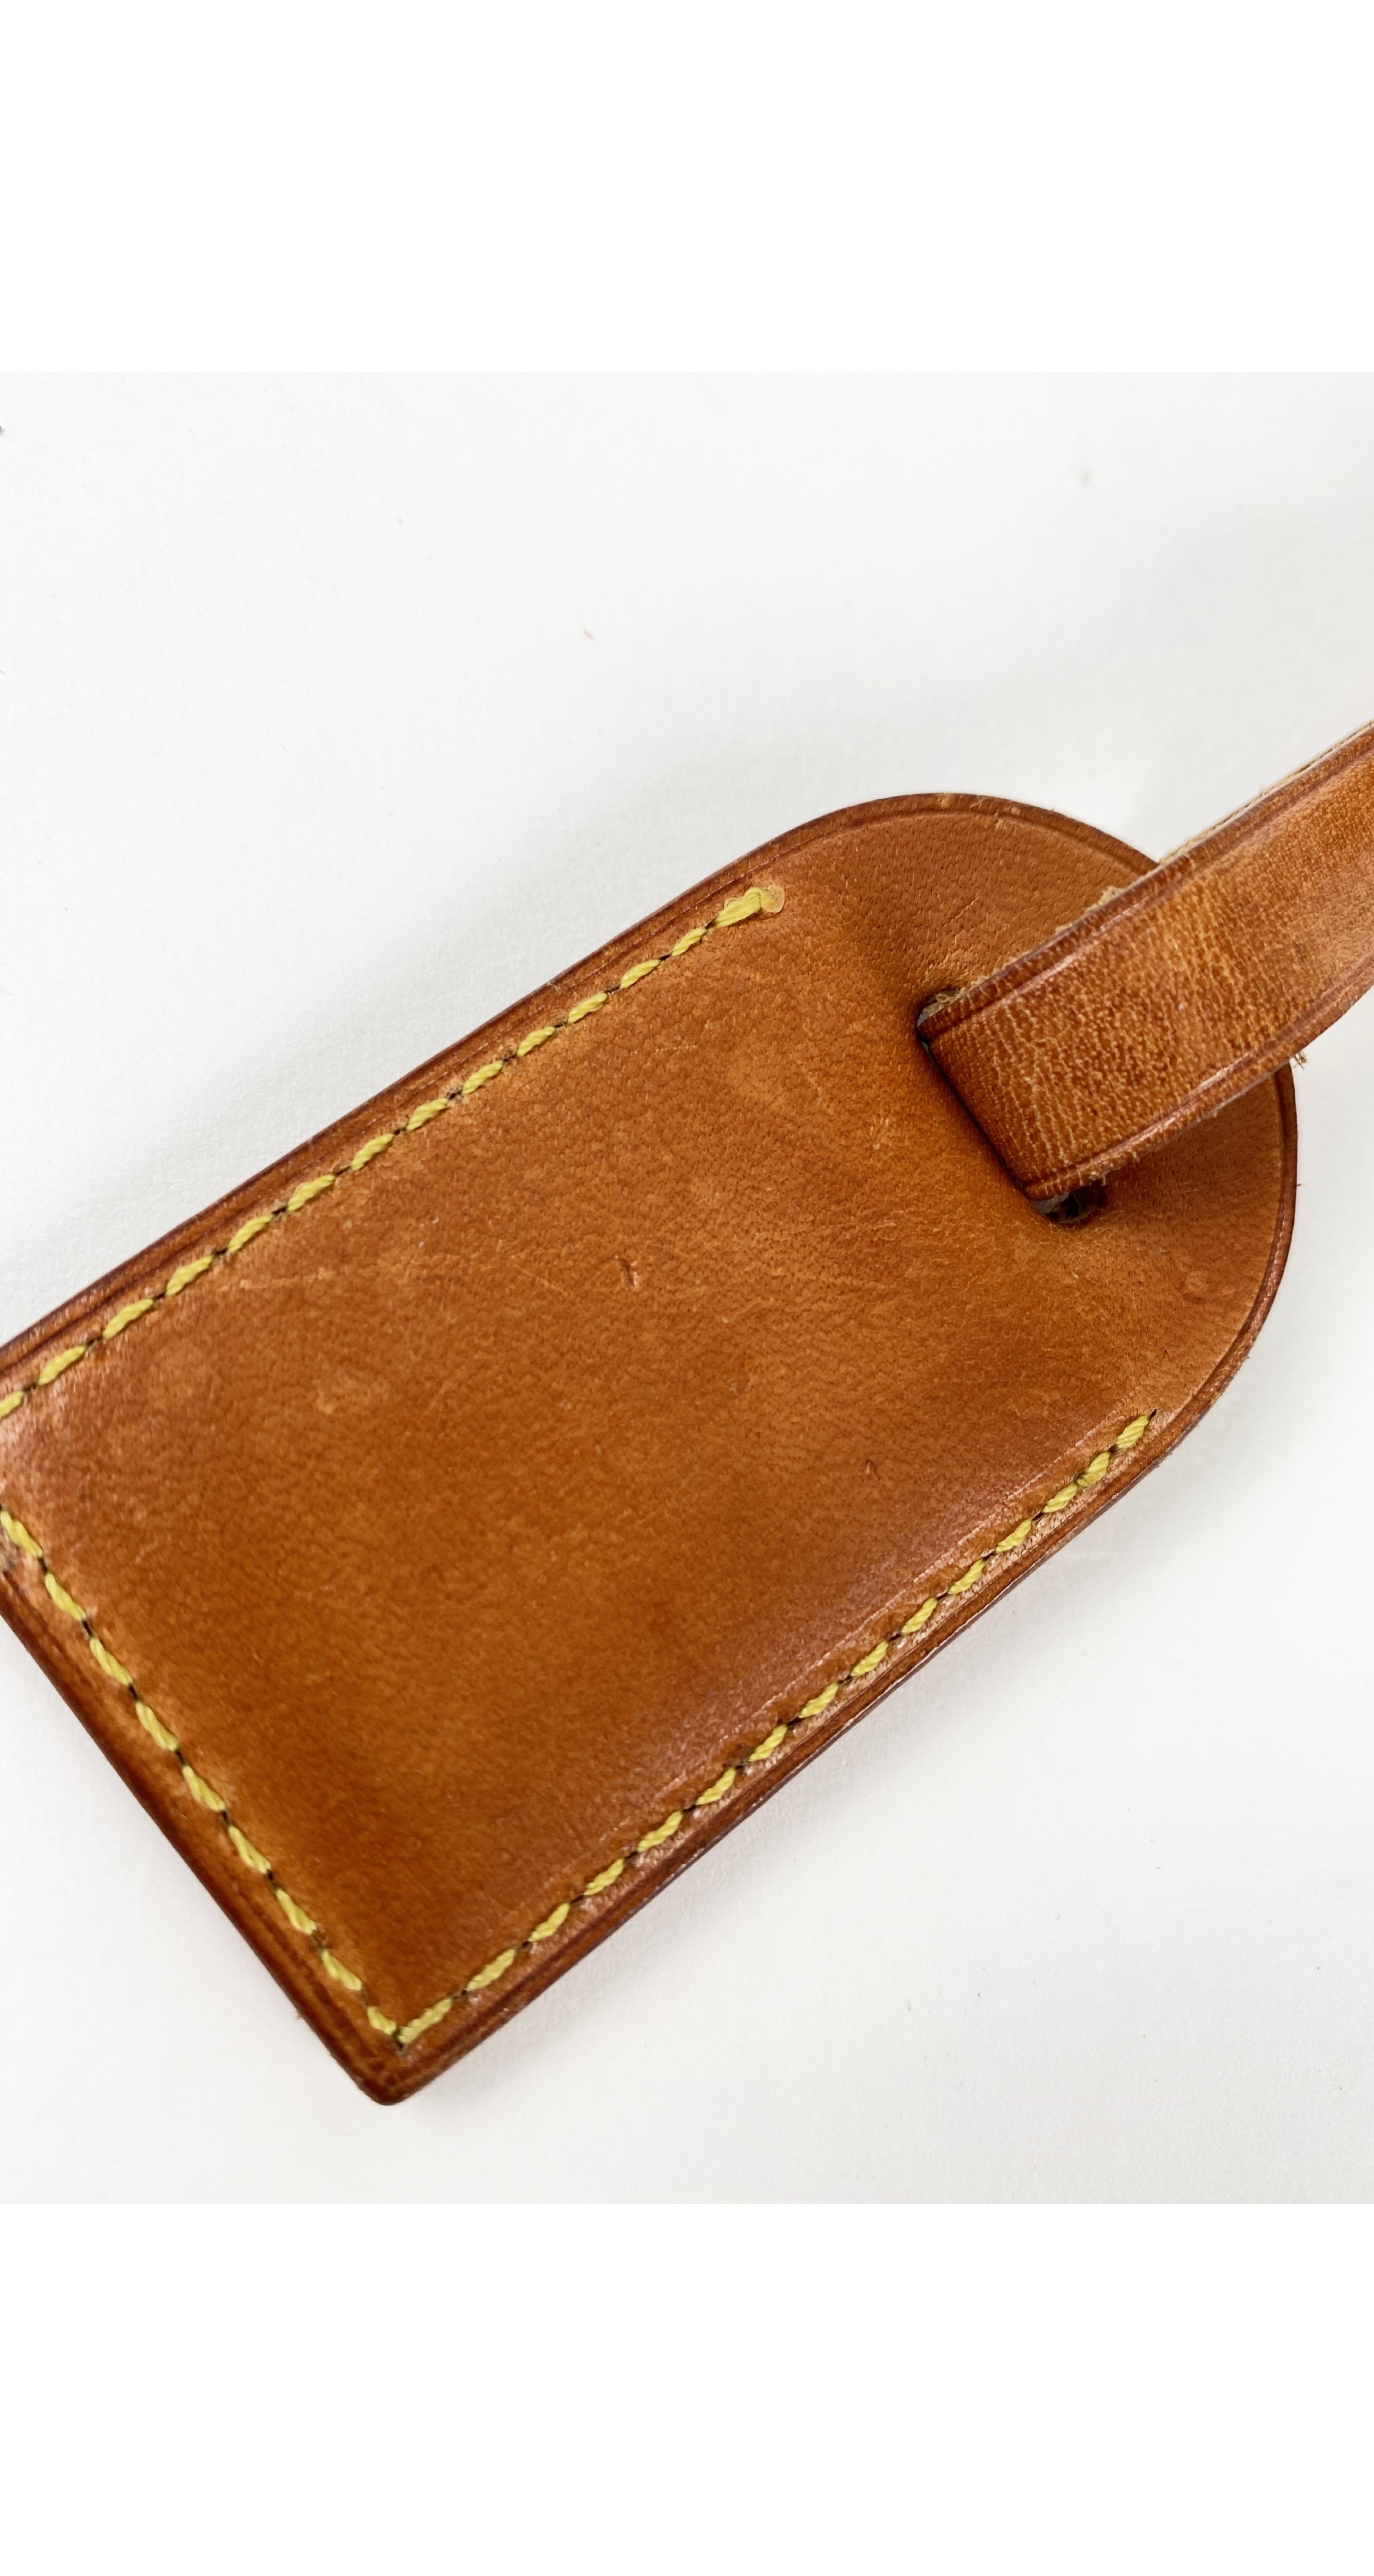 Sold at Auction: Vintage Louis Vuitton Brown Leather Luggage Tag